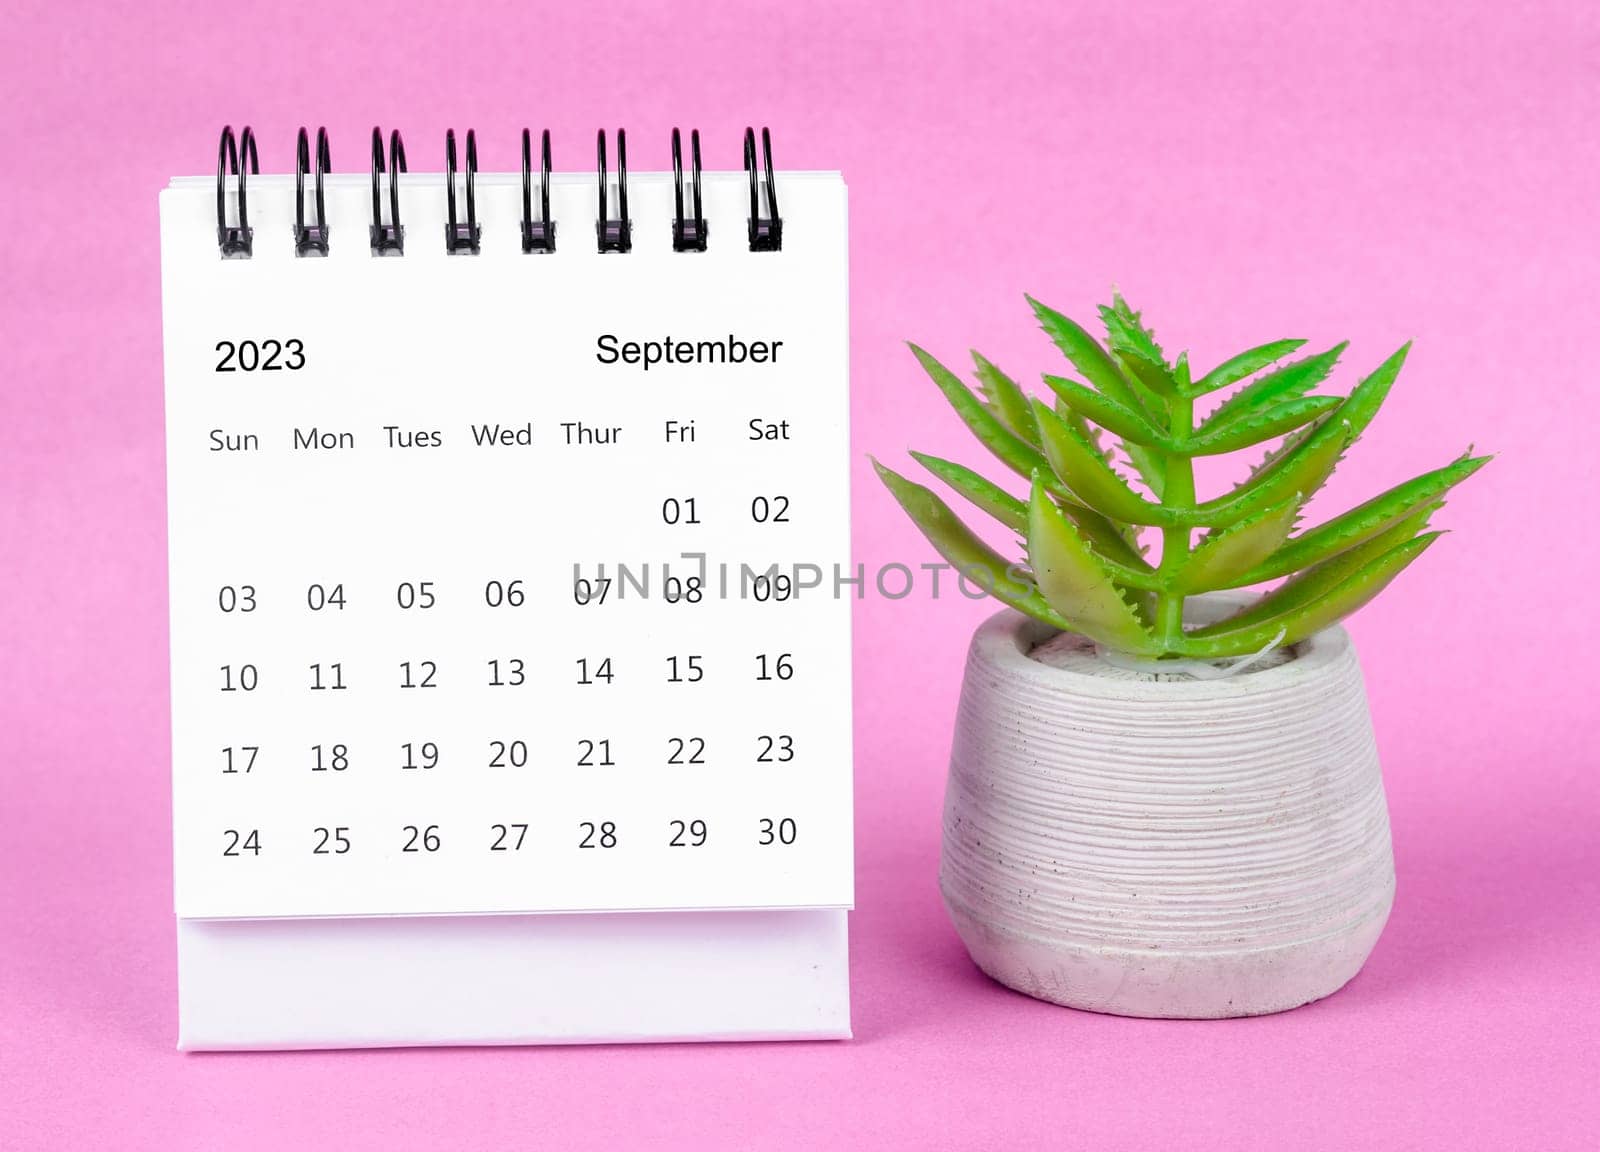 The September 2023 Monthly desk calendar for 2023 year with plant pot on pink background. by Gamjai